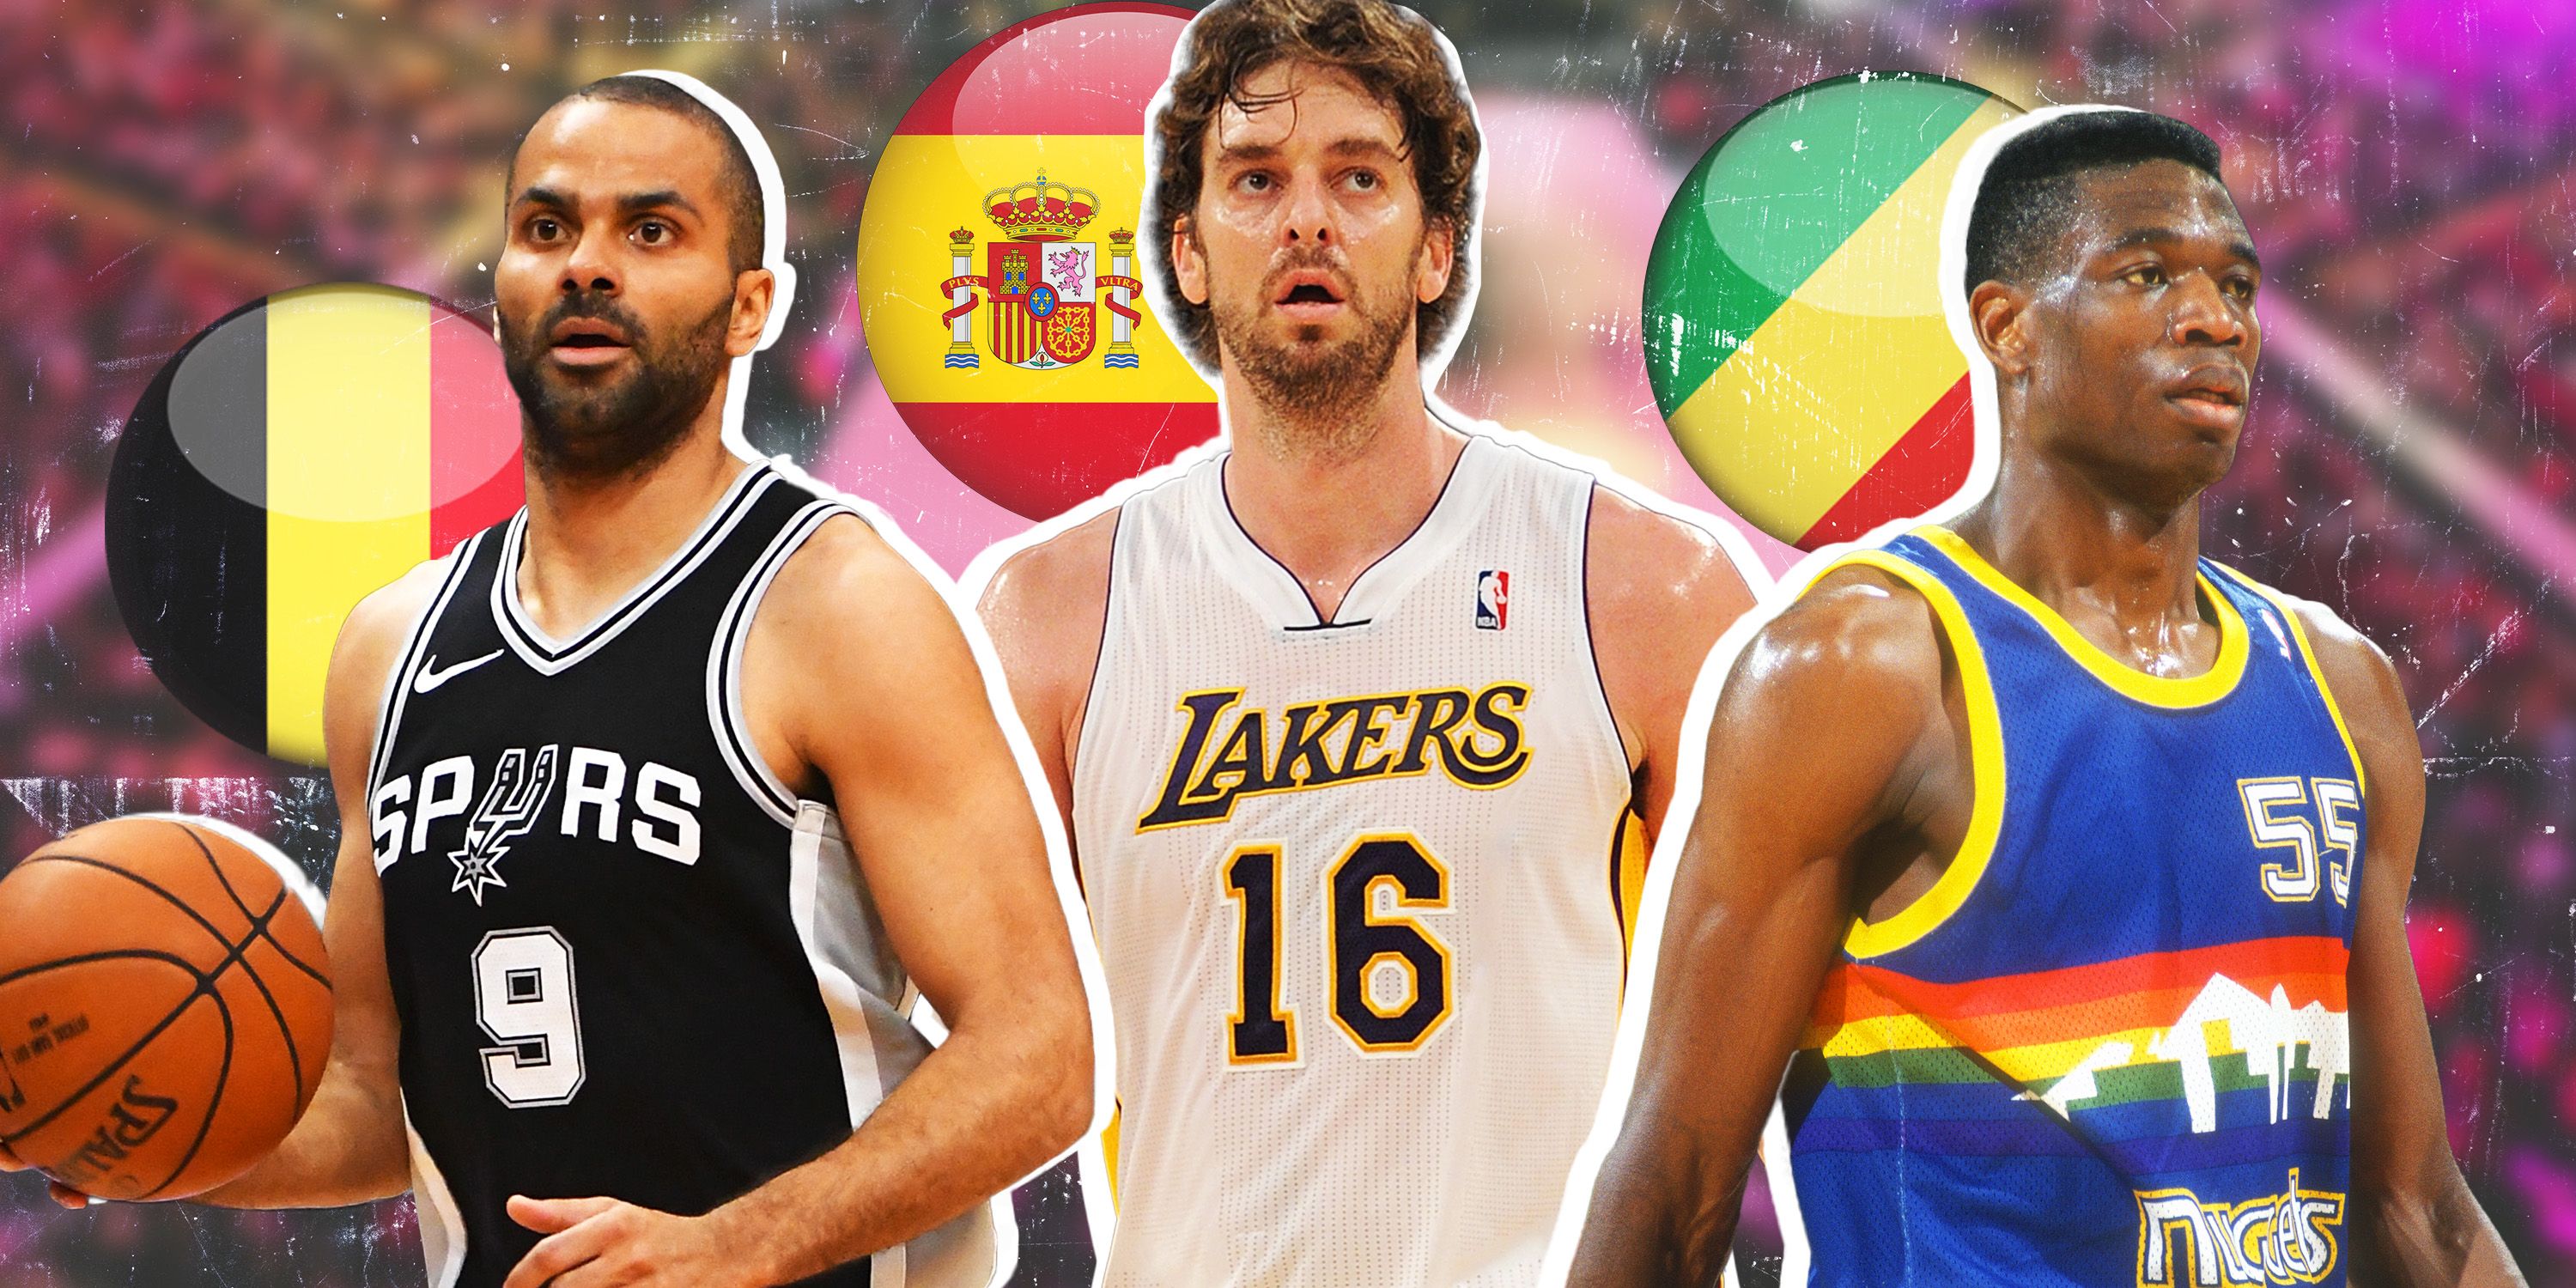 Ranking the 10 best international NBA players of all time